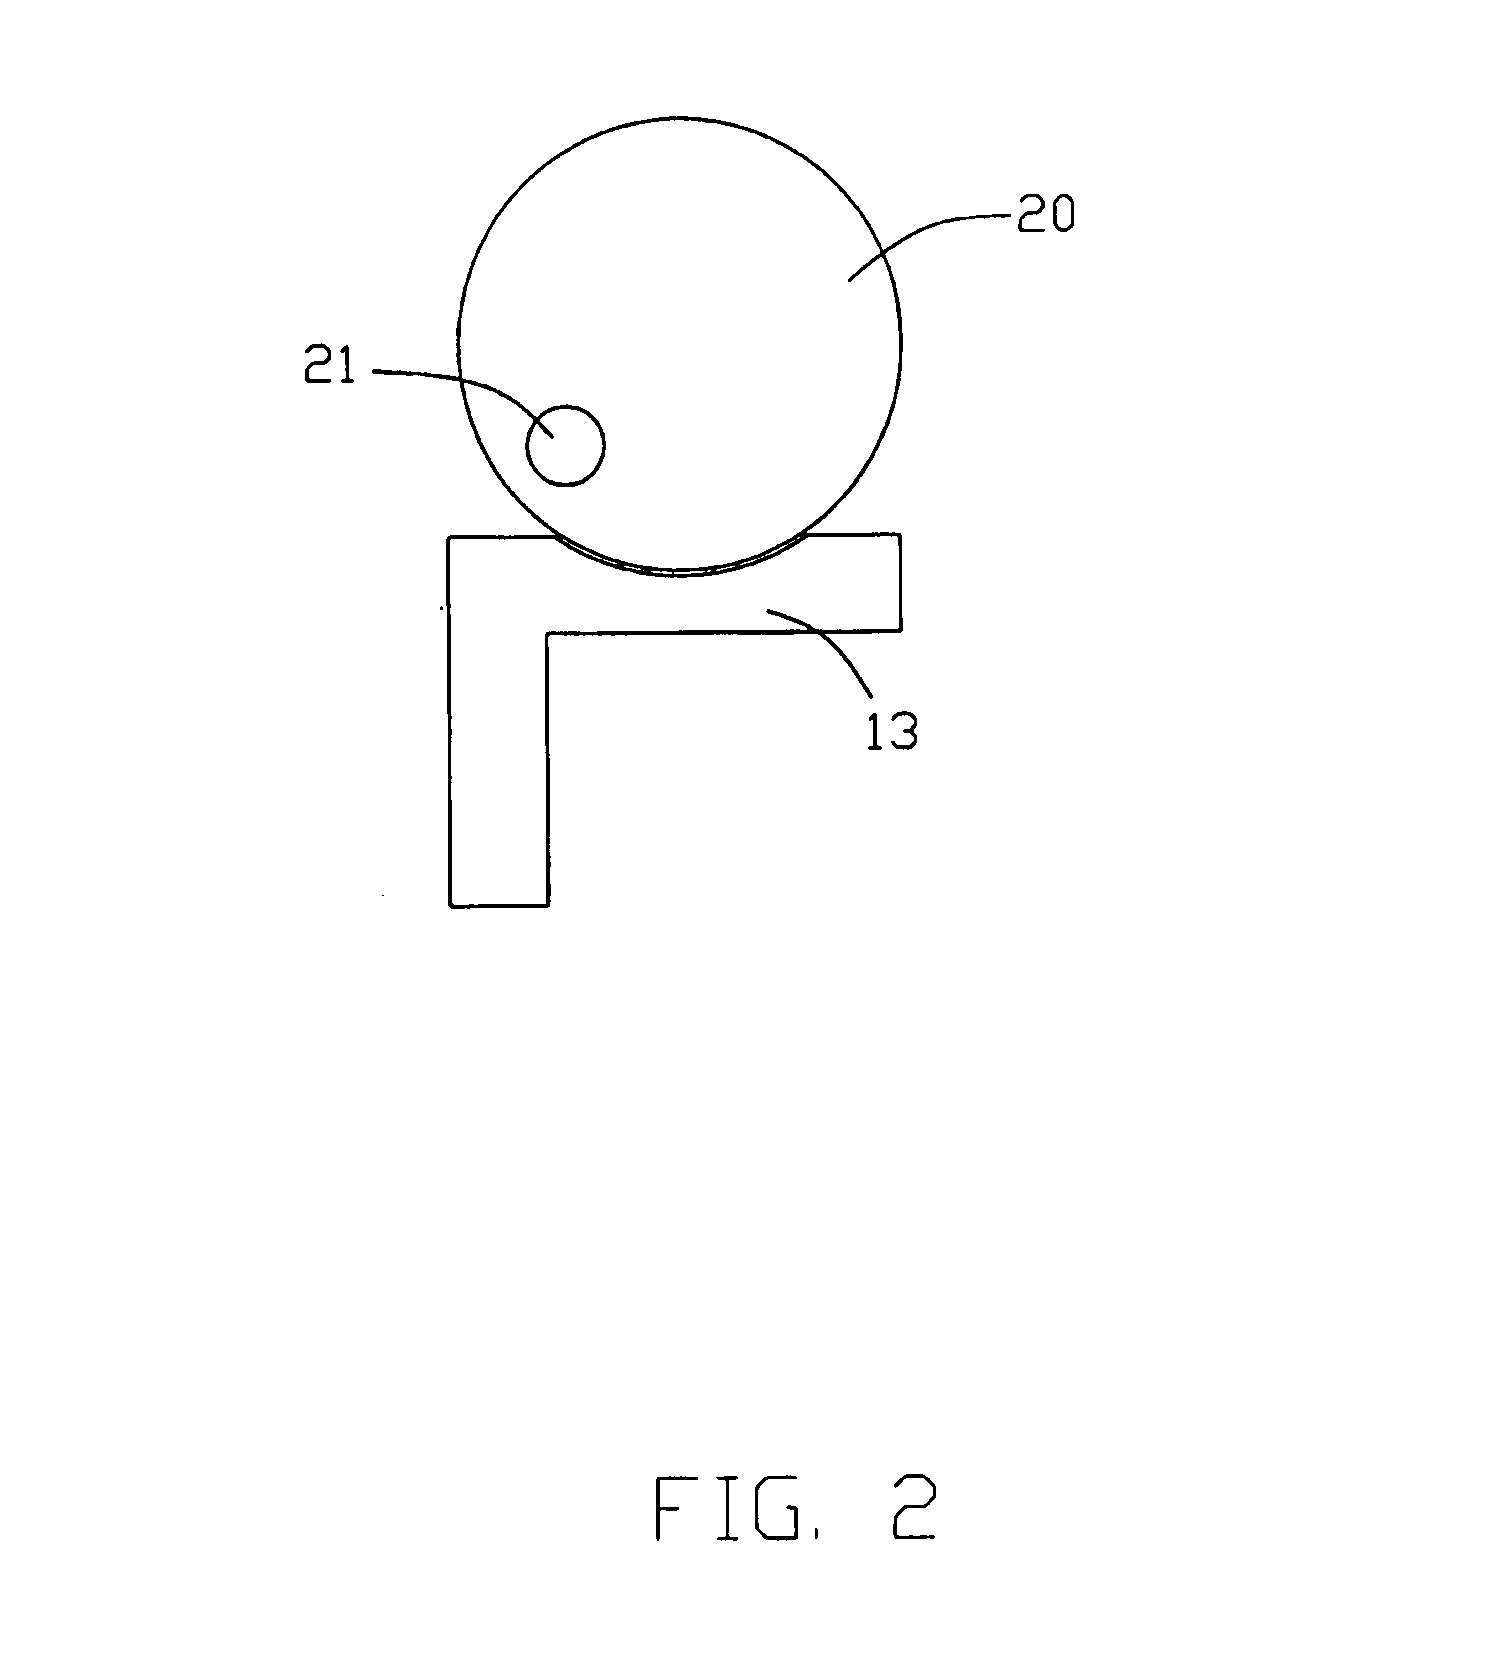 Electrical contact background of the invention